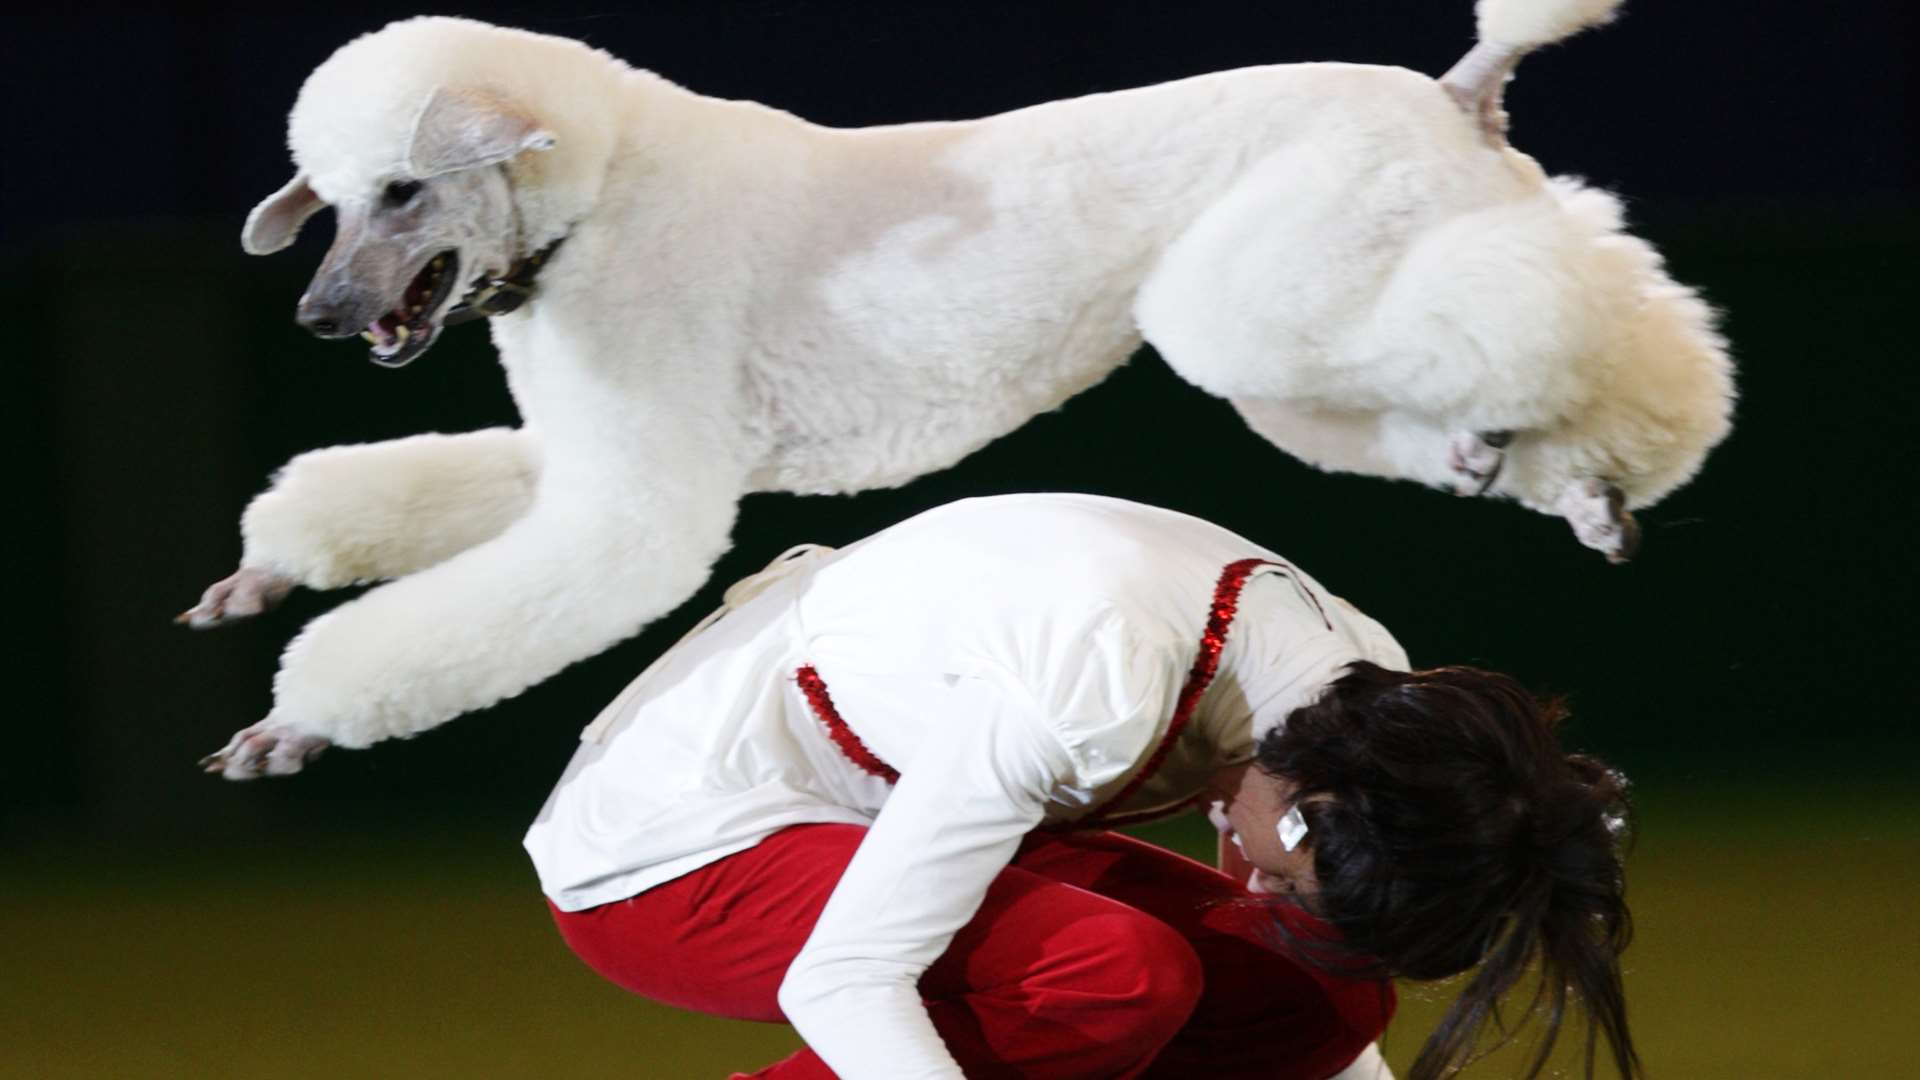 Dog World reported from dog shows like Crufts. Pic from onEdition